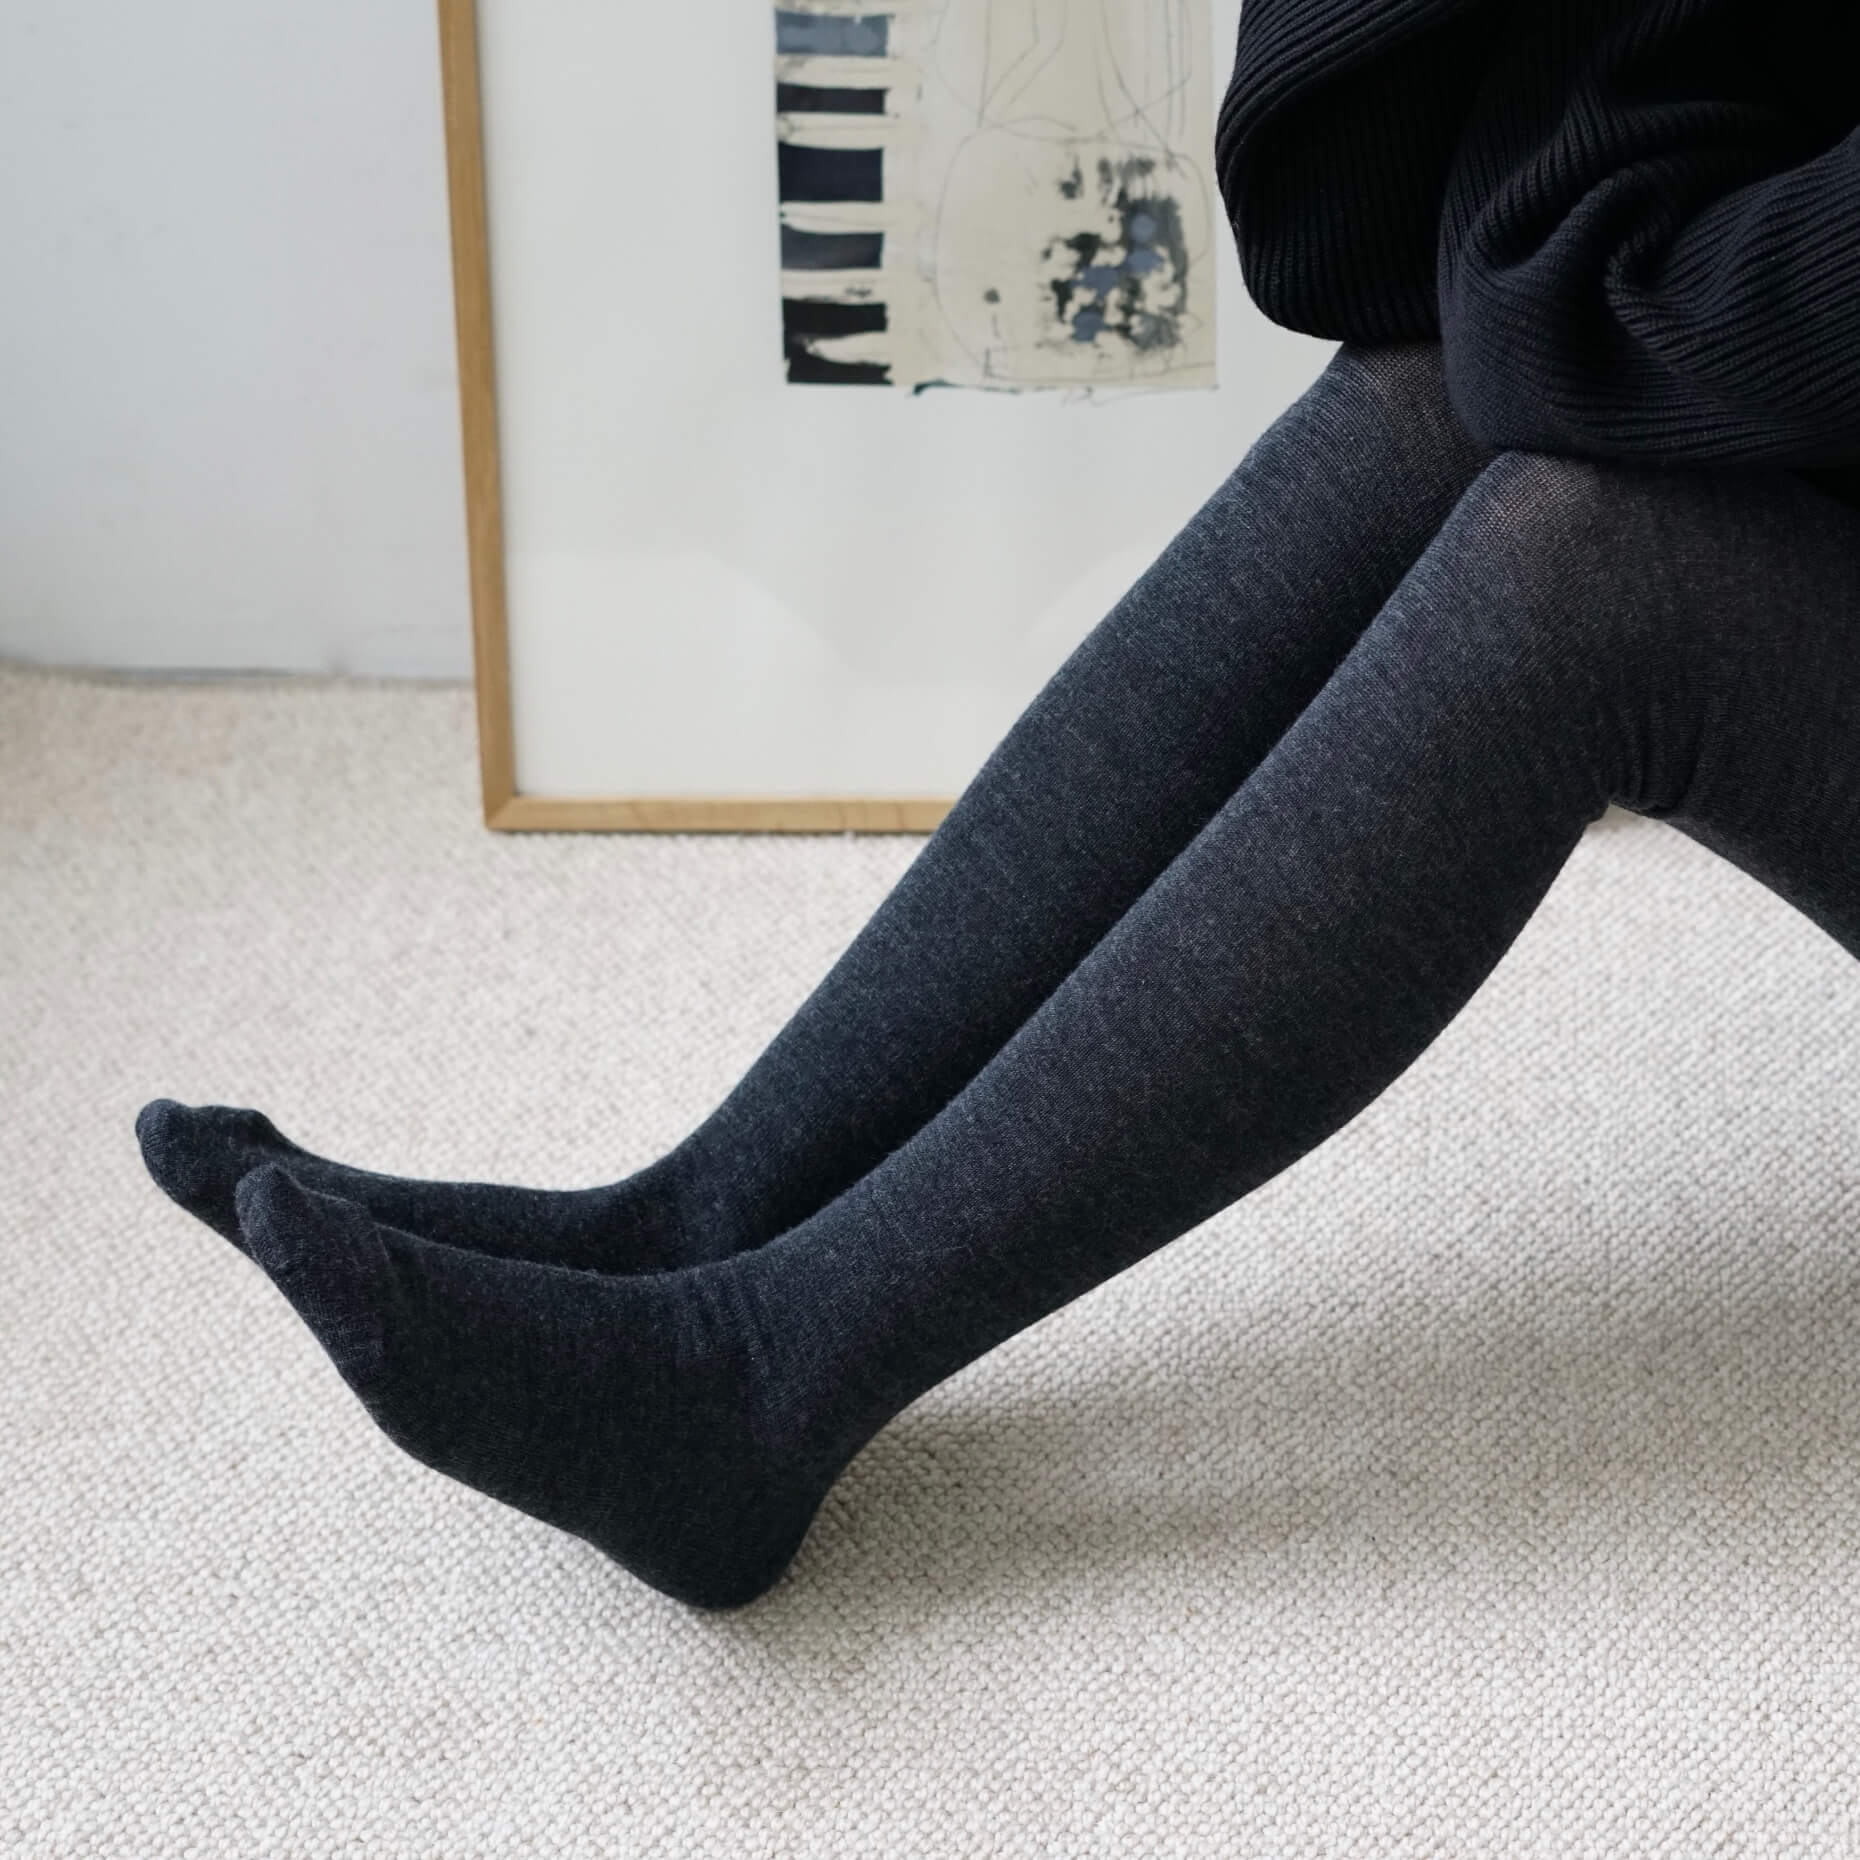 leggings, tights, and leg warmers from the maker hobart